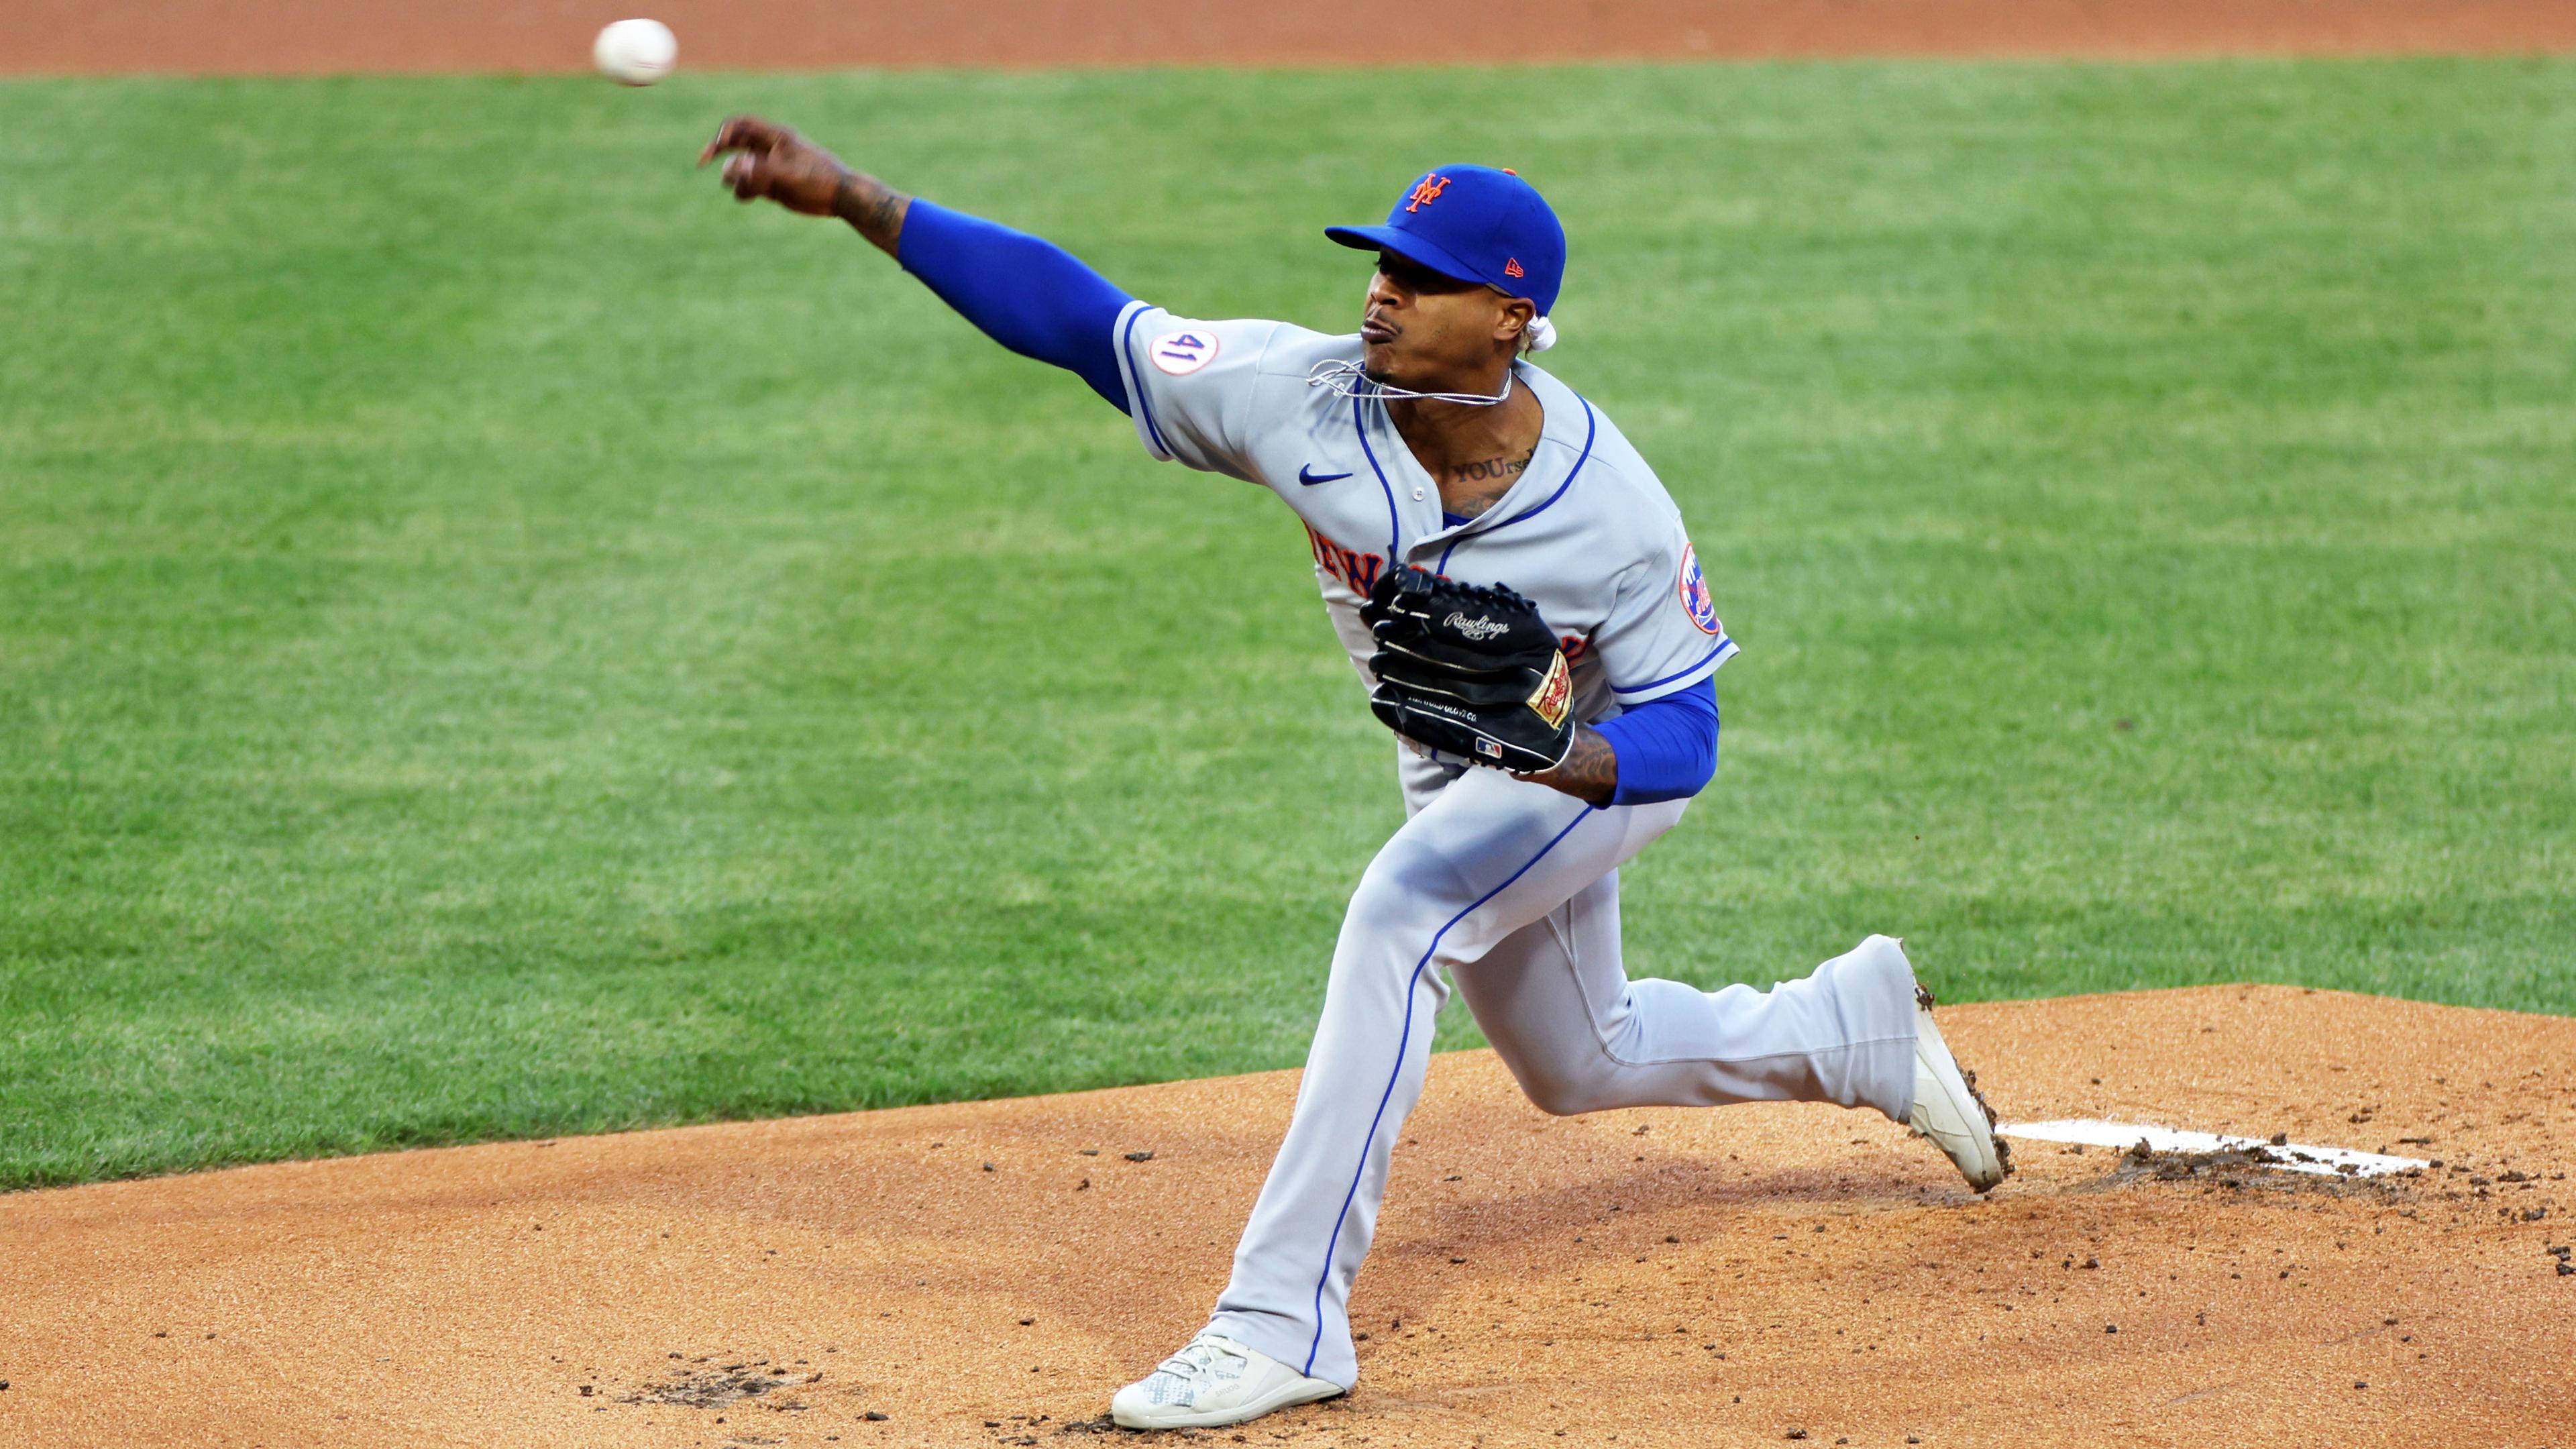 Apr 30, 2021; Philadelphia, Pennsylvania, USA; New York Mets starting pitcher Marcus Stroman (0) pitches against the Philadelphia Phillies in the first inning at Citizens Bank Park at Citizens Bank Park. / Kam Nedd-USA TODAY Sports